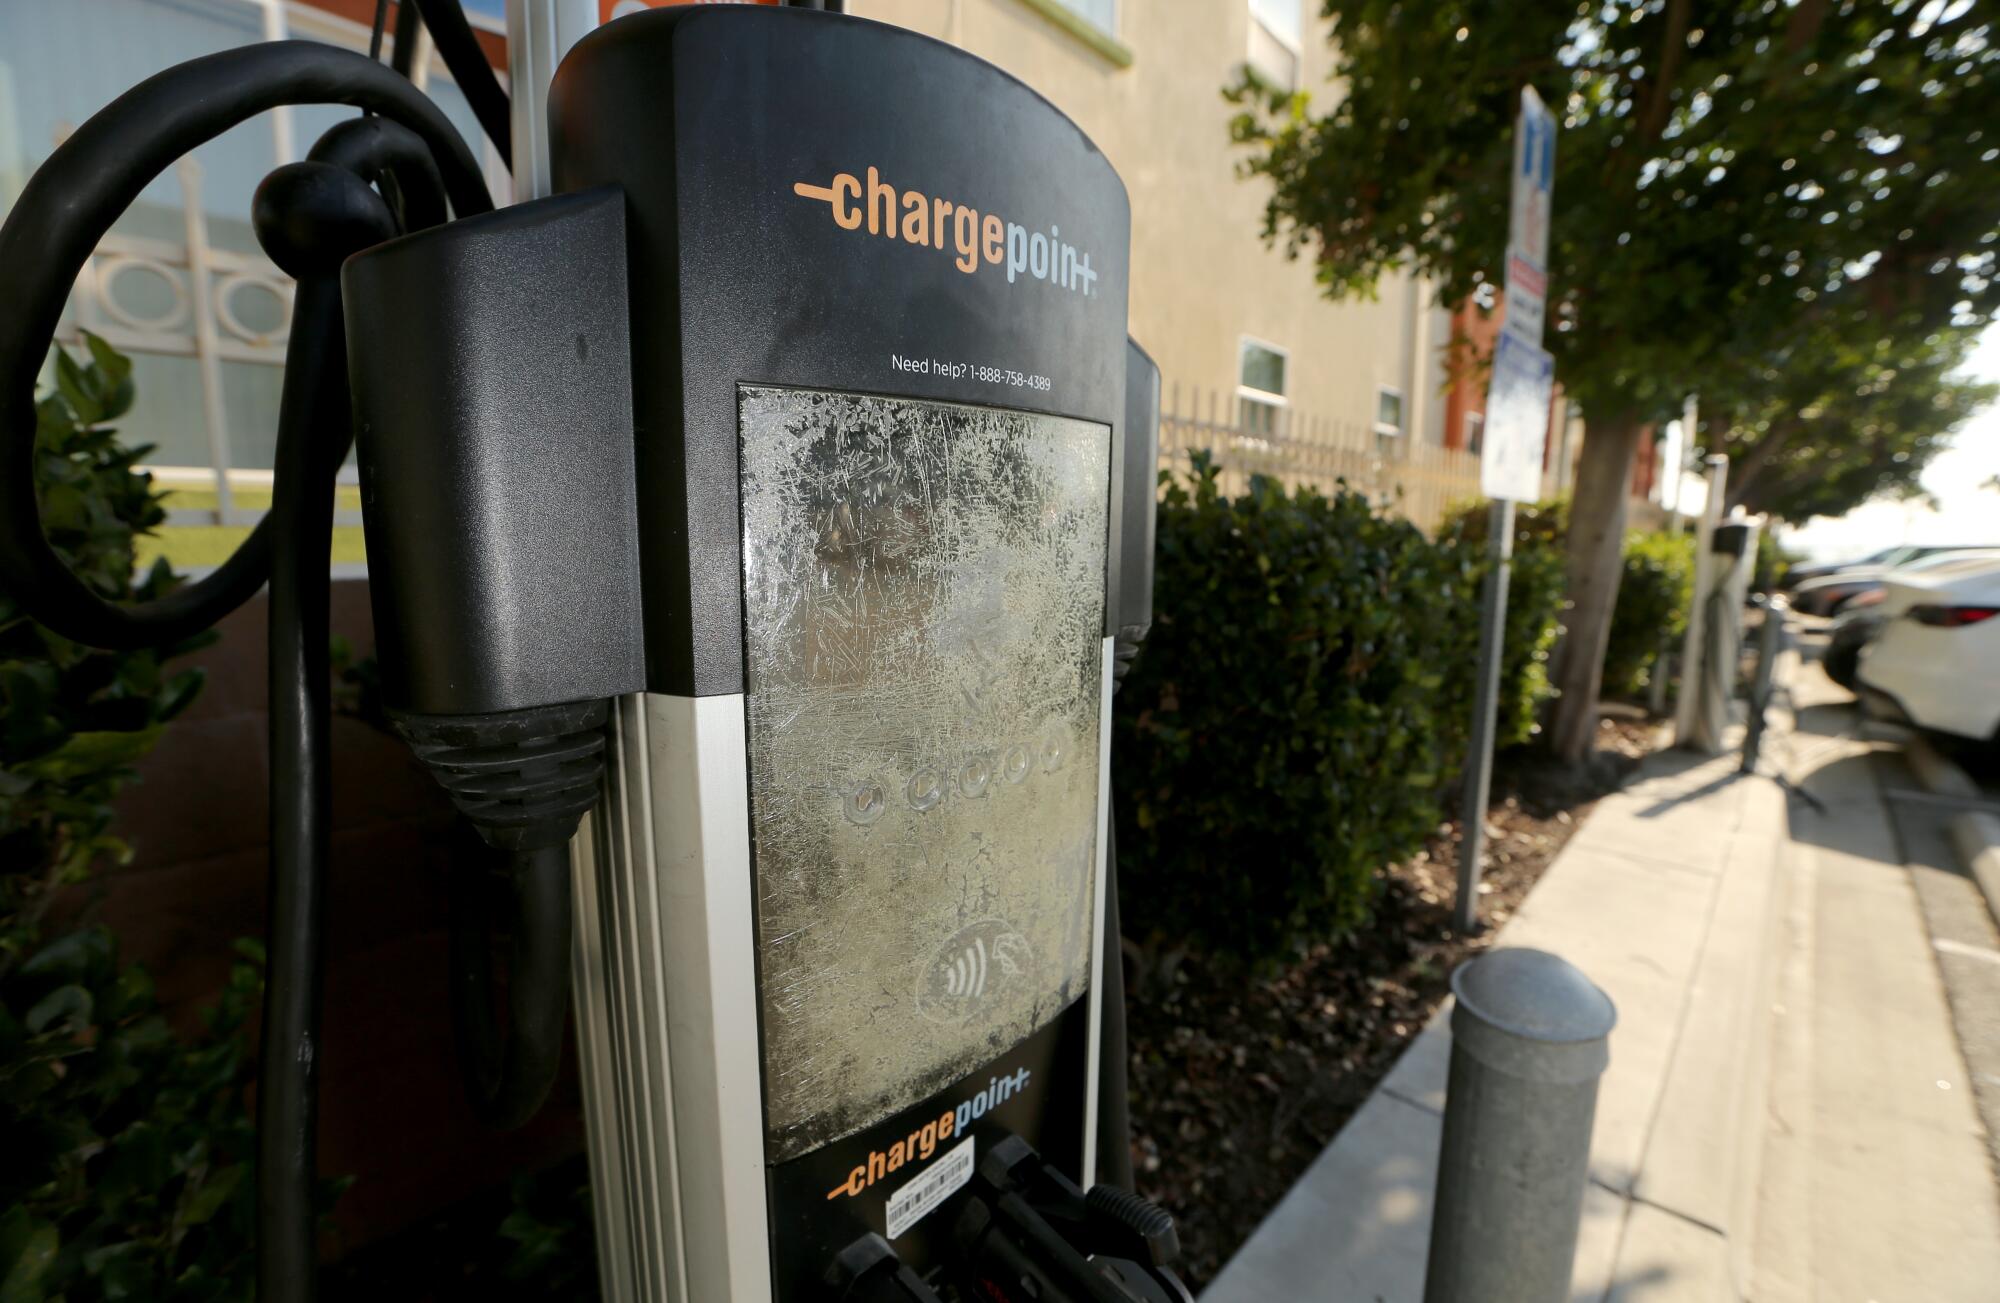 A ChargePoint charger with a cracked, unreadable screen.